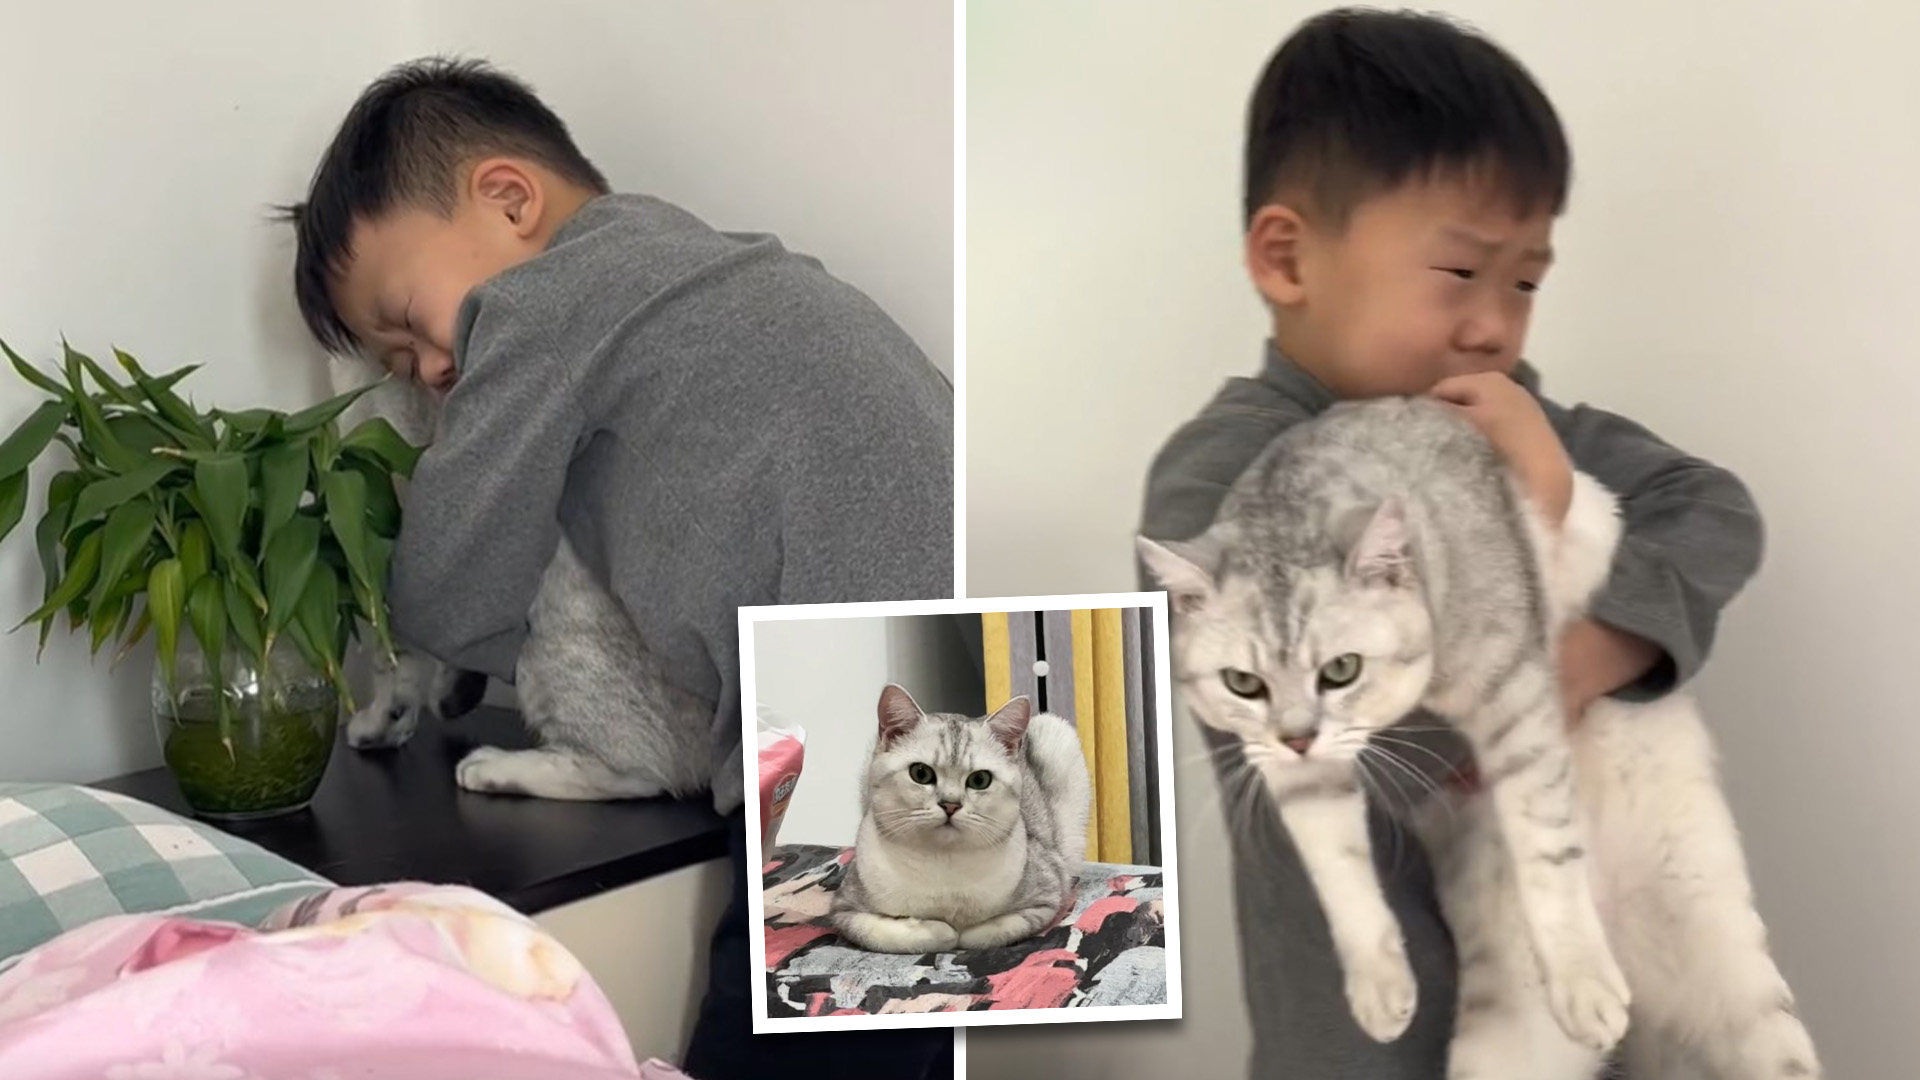 The video, viewed 7.9 million times on Douyin alone, shows the boy hugging the cat as he pleads for it to stop shedding hair. Photo: SCMP composite/Douyin